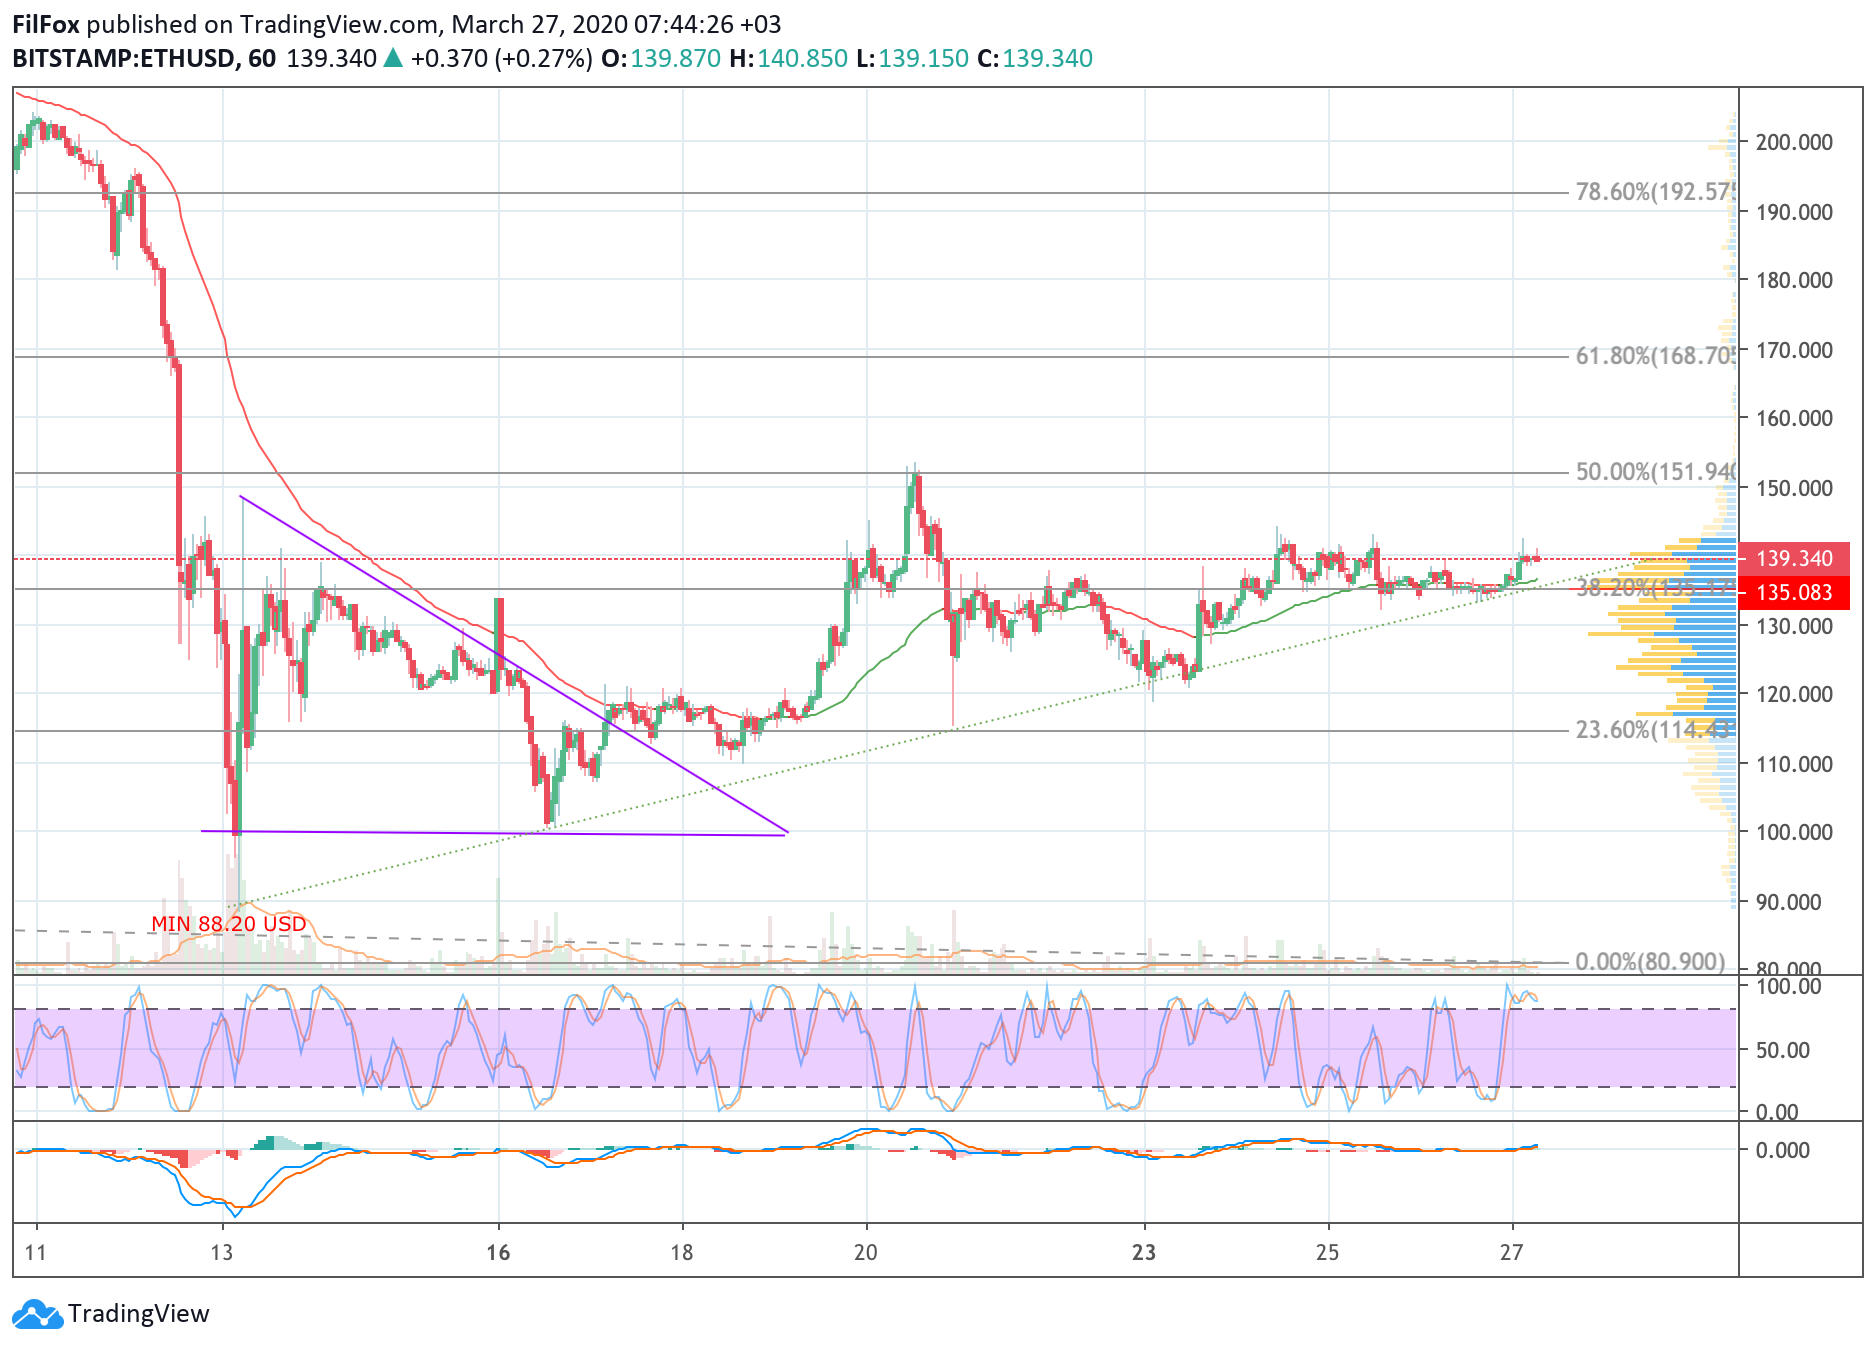 Analysis of cryptocurrency pairs BTC / USD, ETH / USD and XRP / USD on 03/27/2020